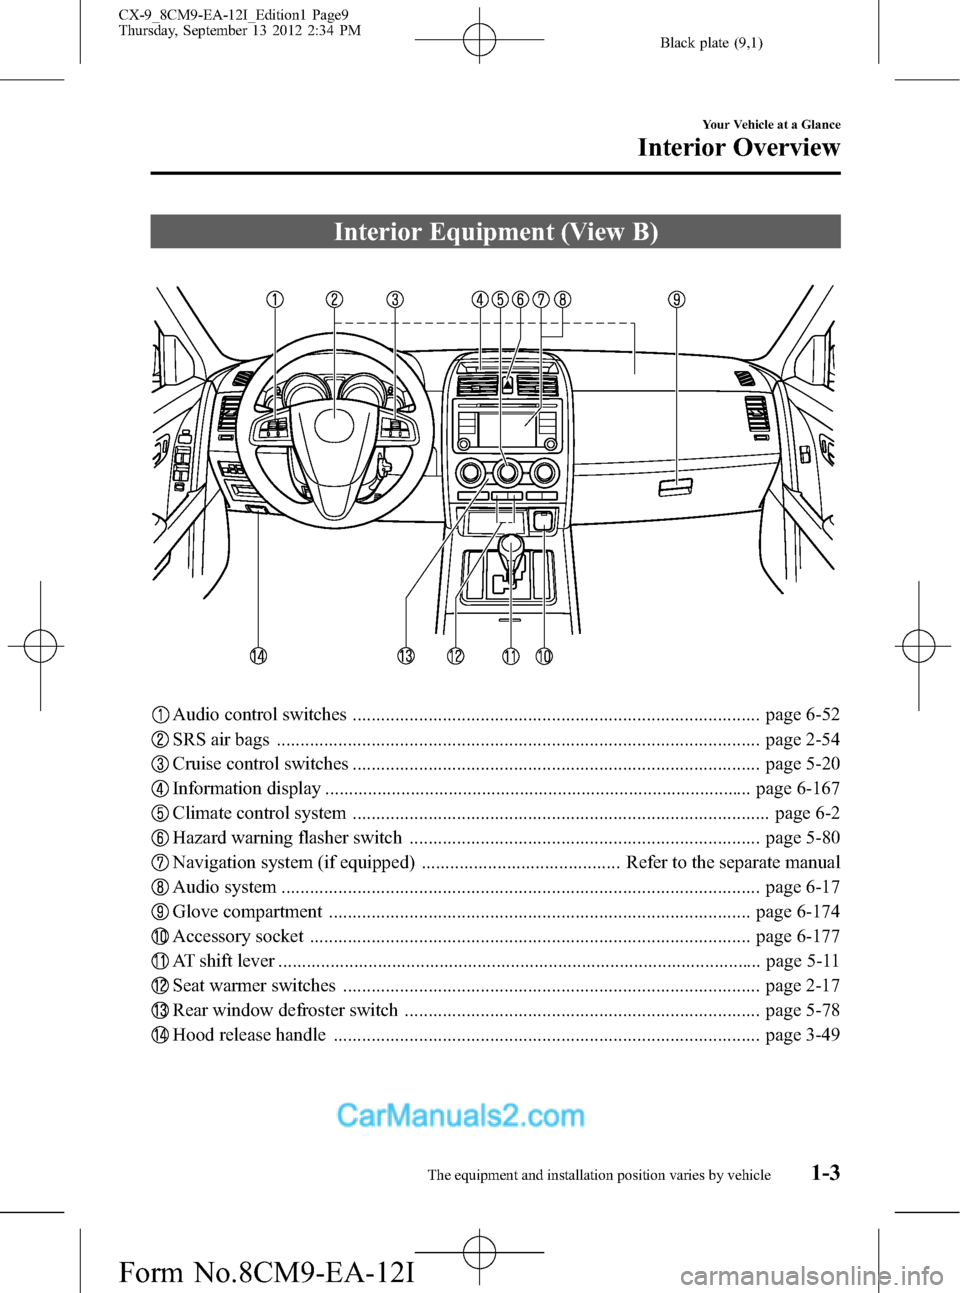 MAZDA MODEL CX-9 2013  Owners Manual (in English) Black plate (9,1)
Interior Equipment (View B)
Audio control switches ...................................................................................... page 6-52
SRS air bags .....................